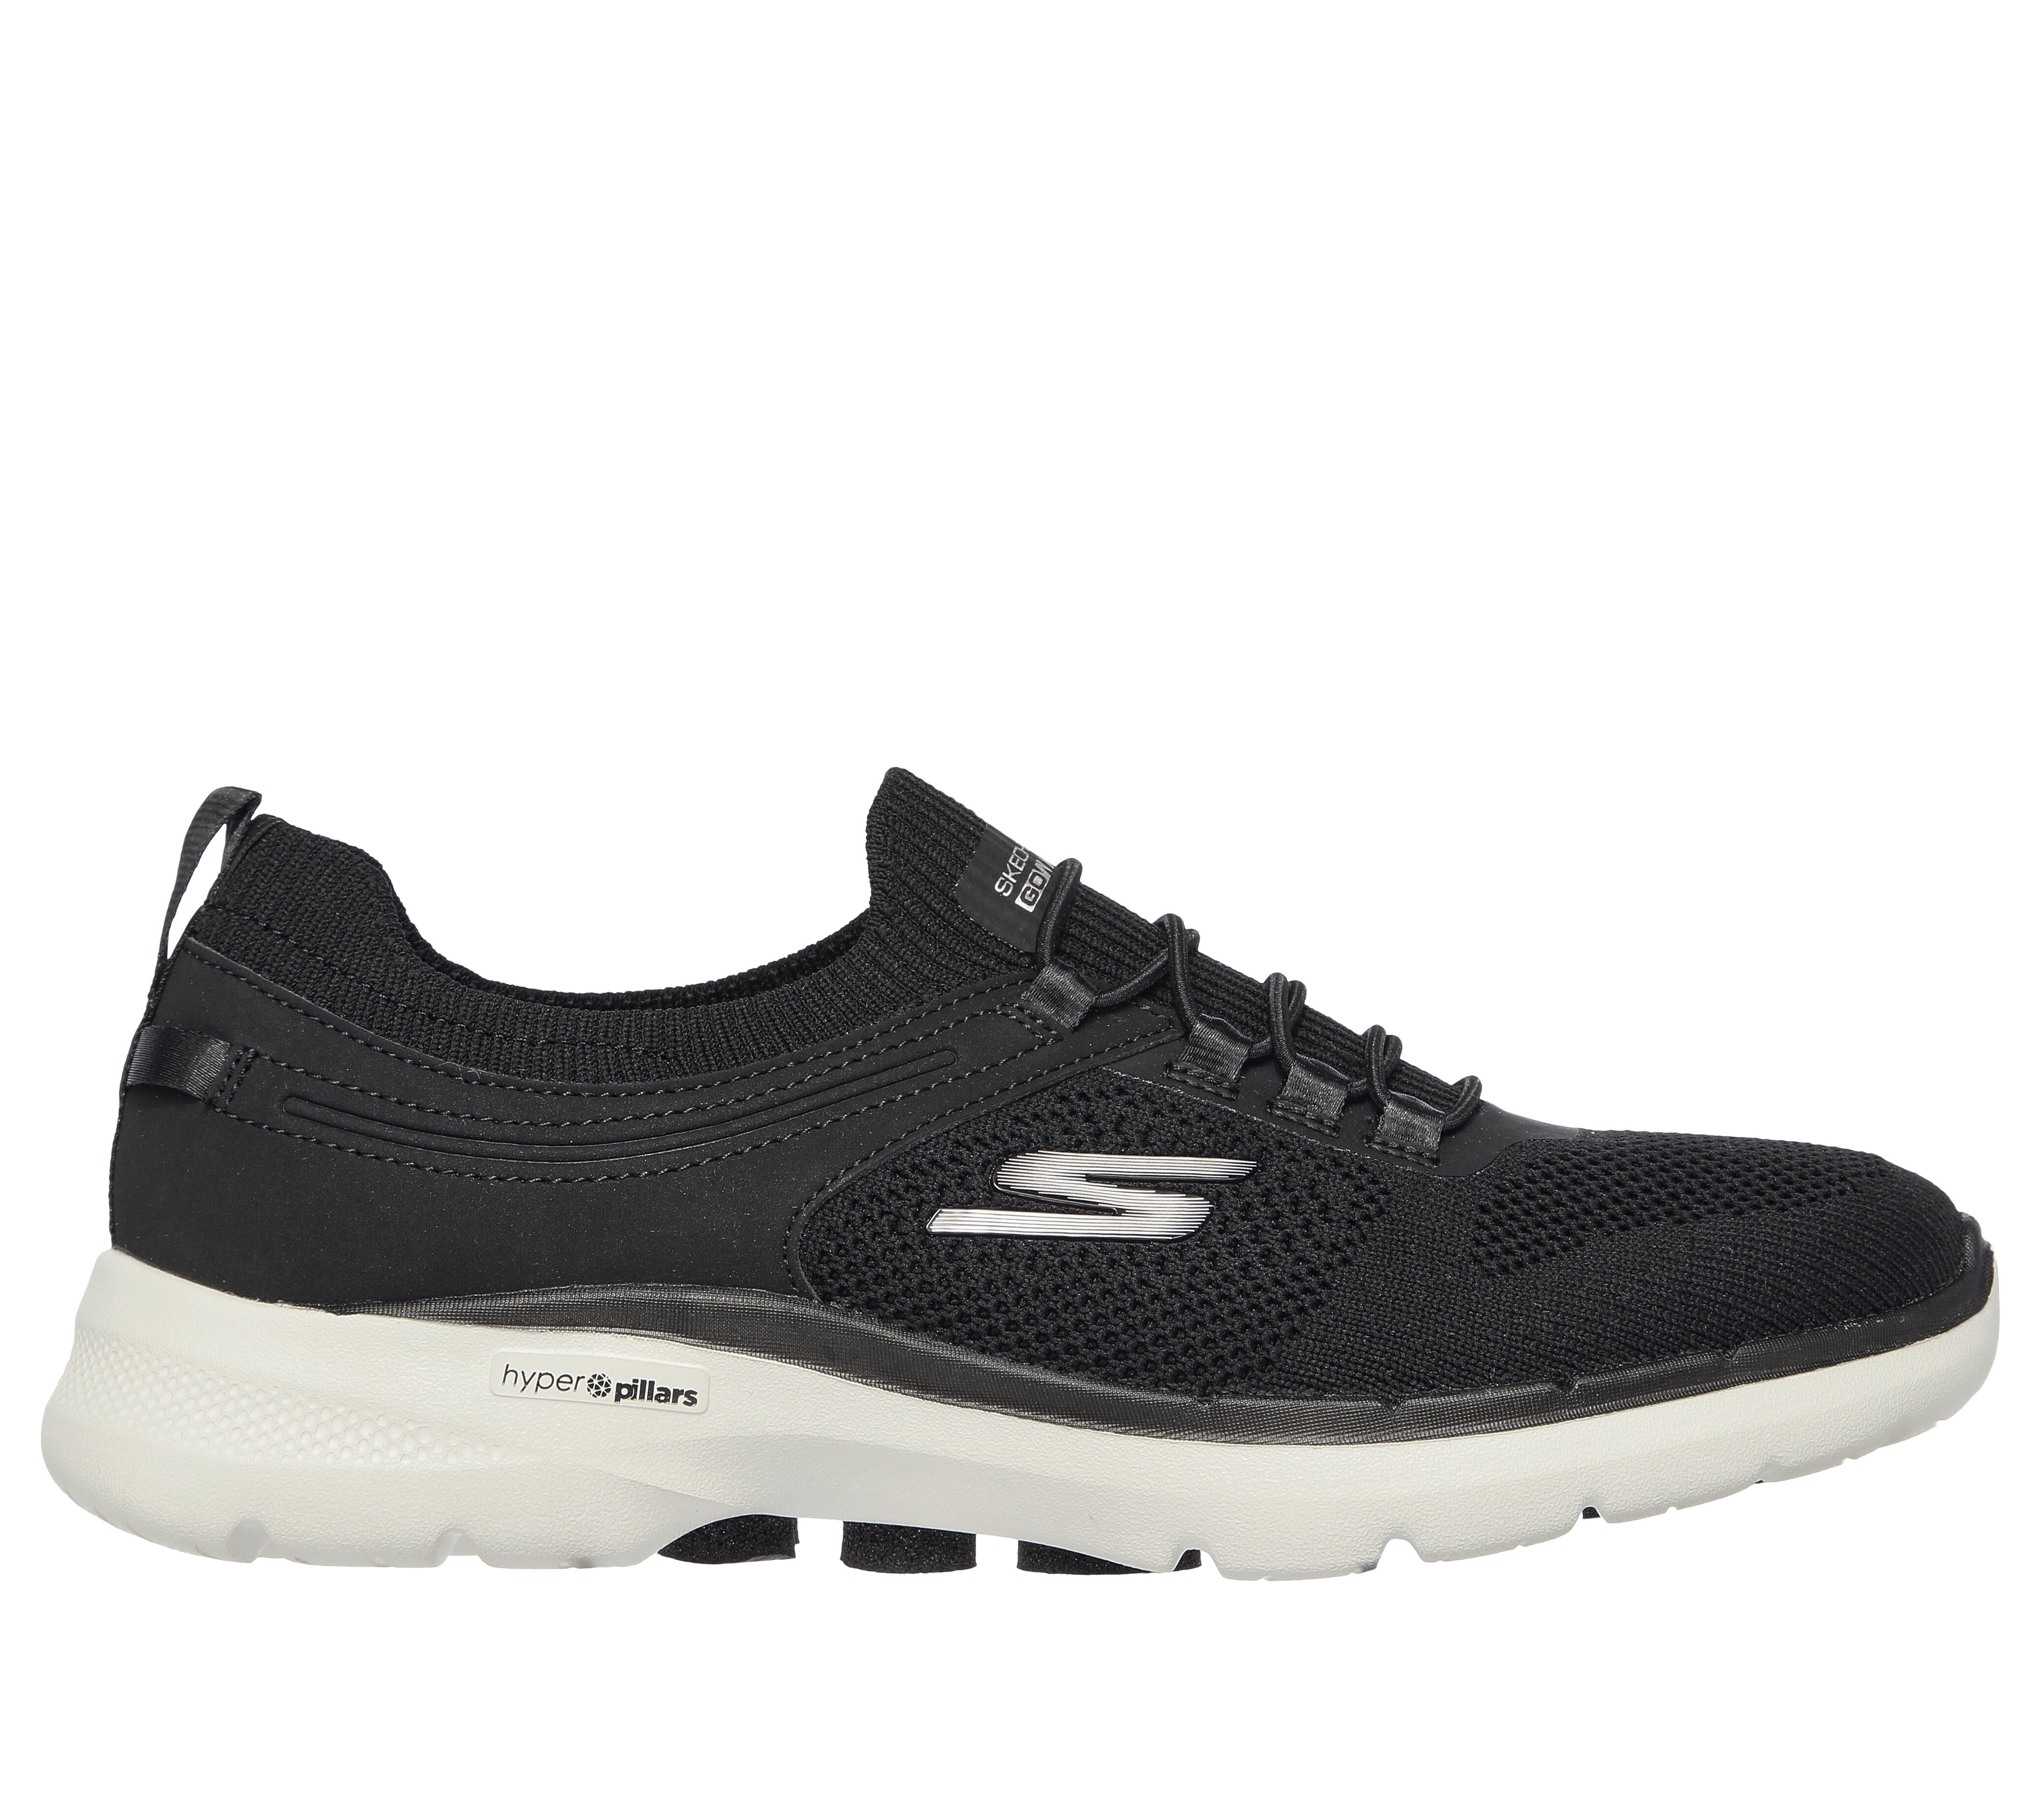 skechers white shoes 2018